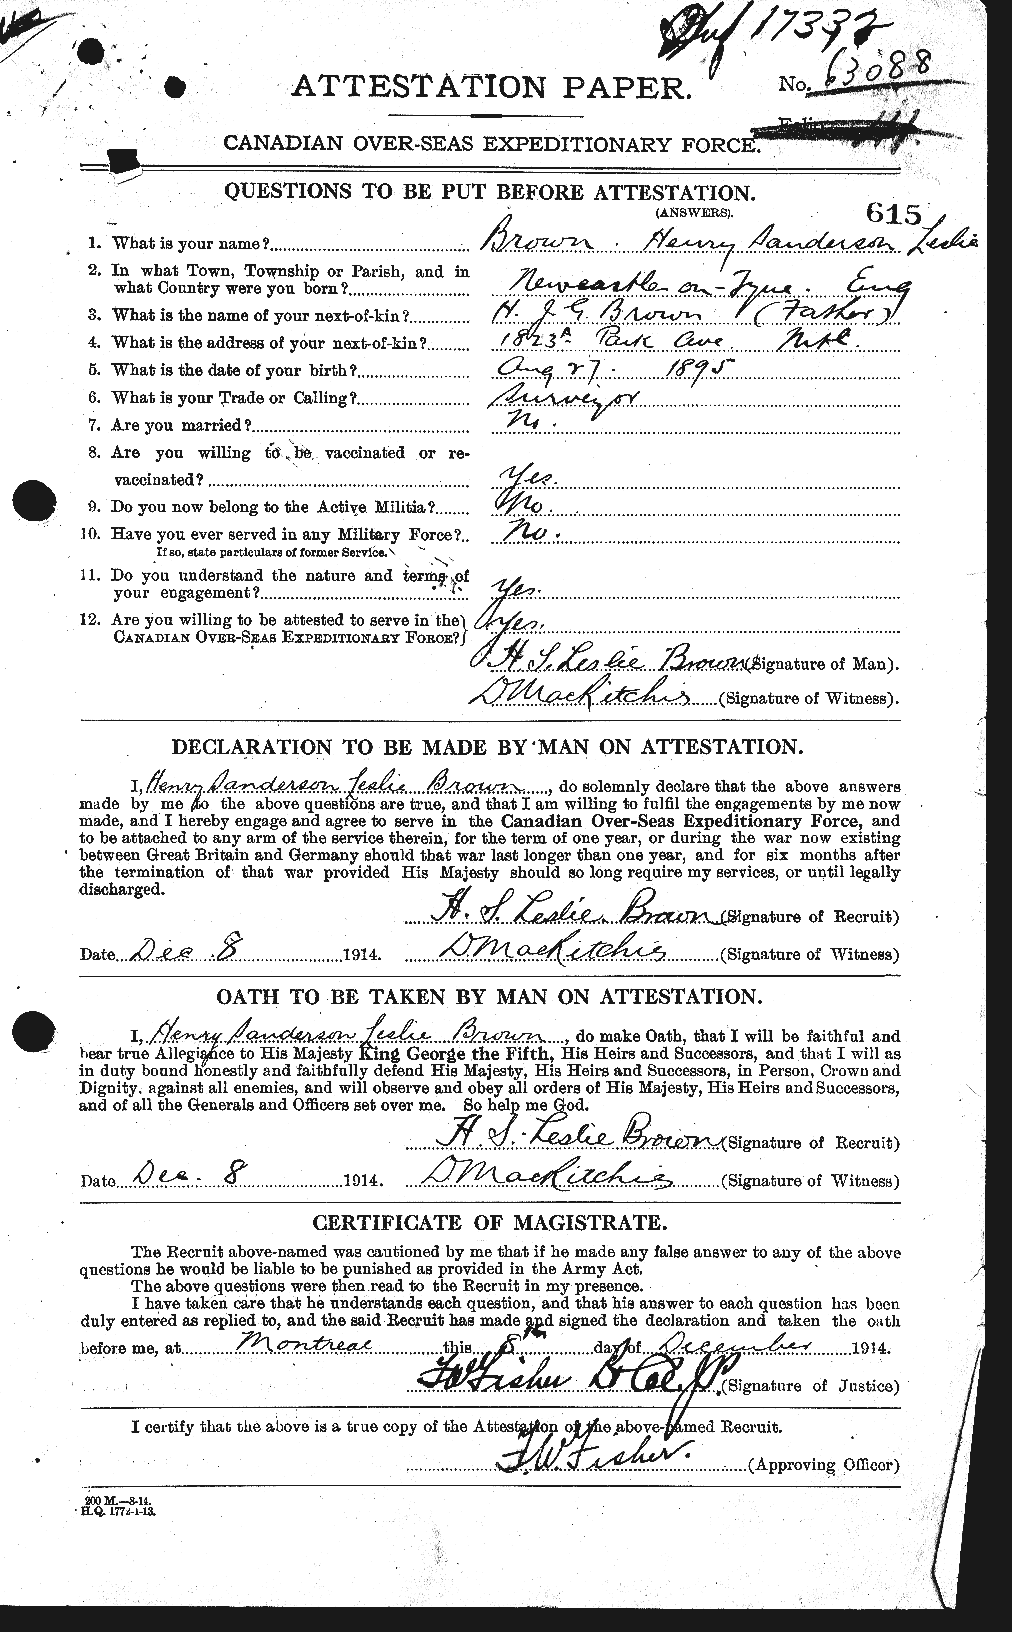 Personnel Records of the First World War - CEF 265538a